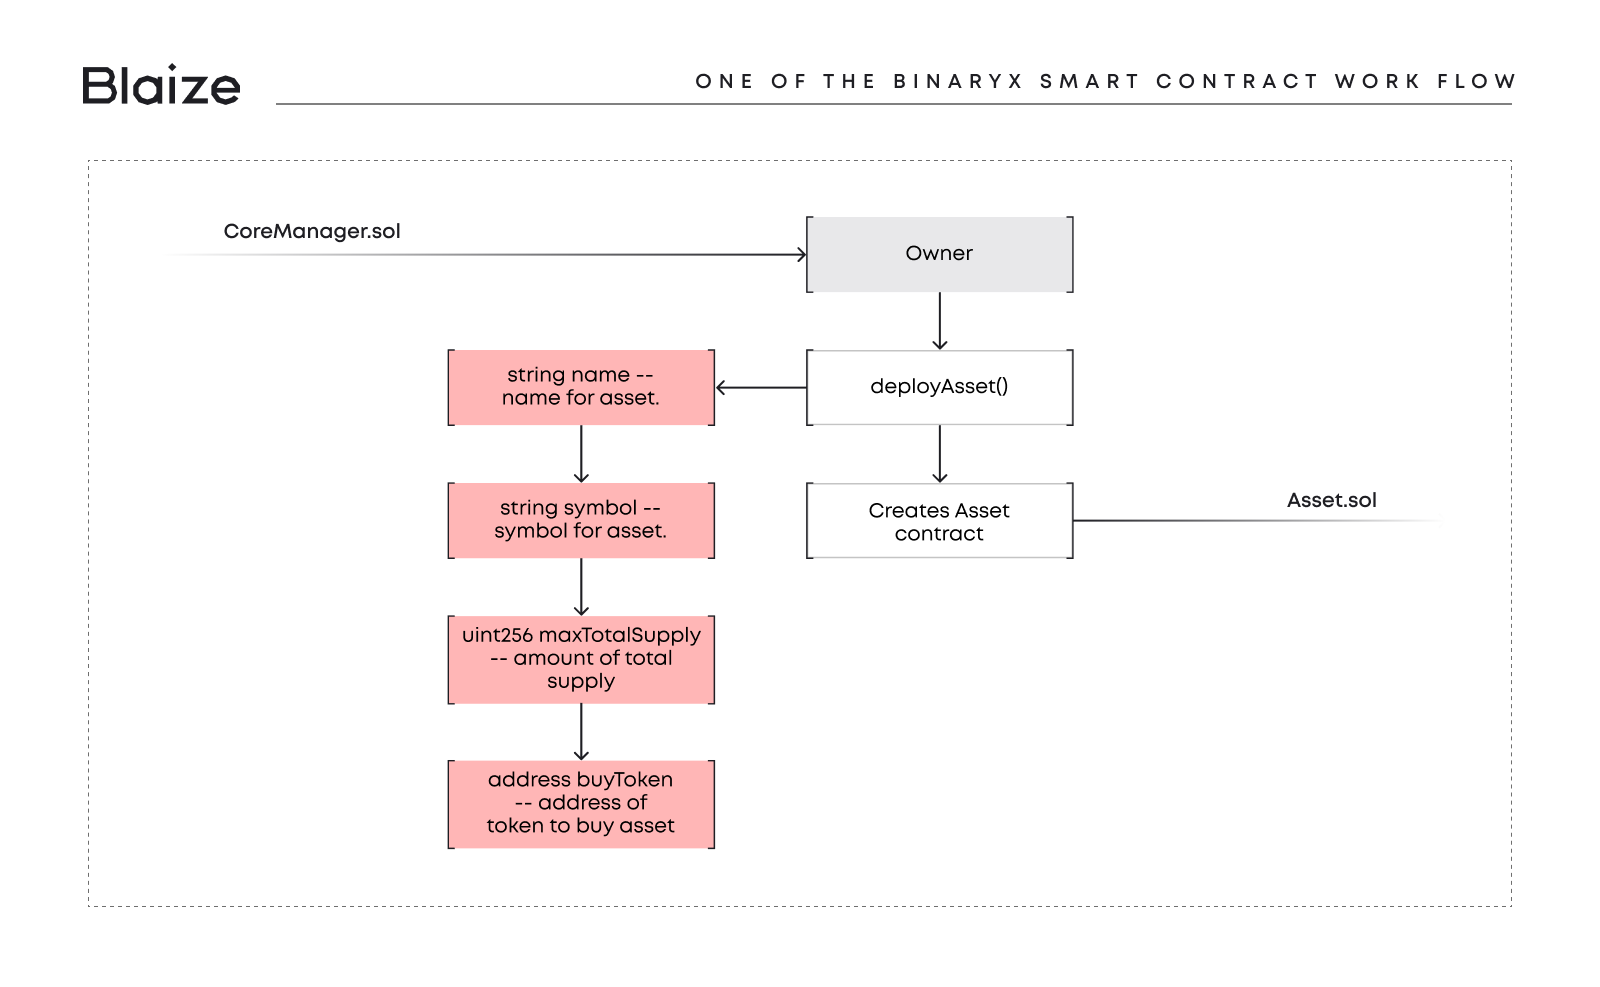 One of the Binaryx smart contract work flow